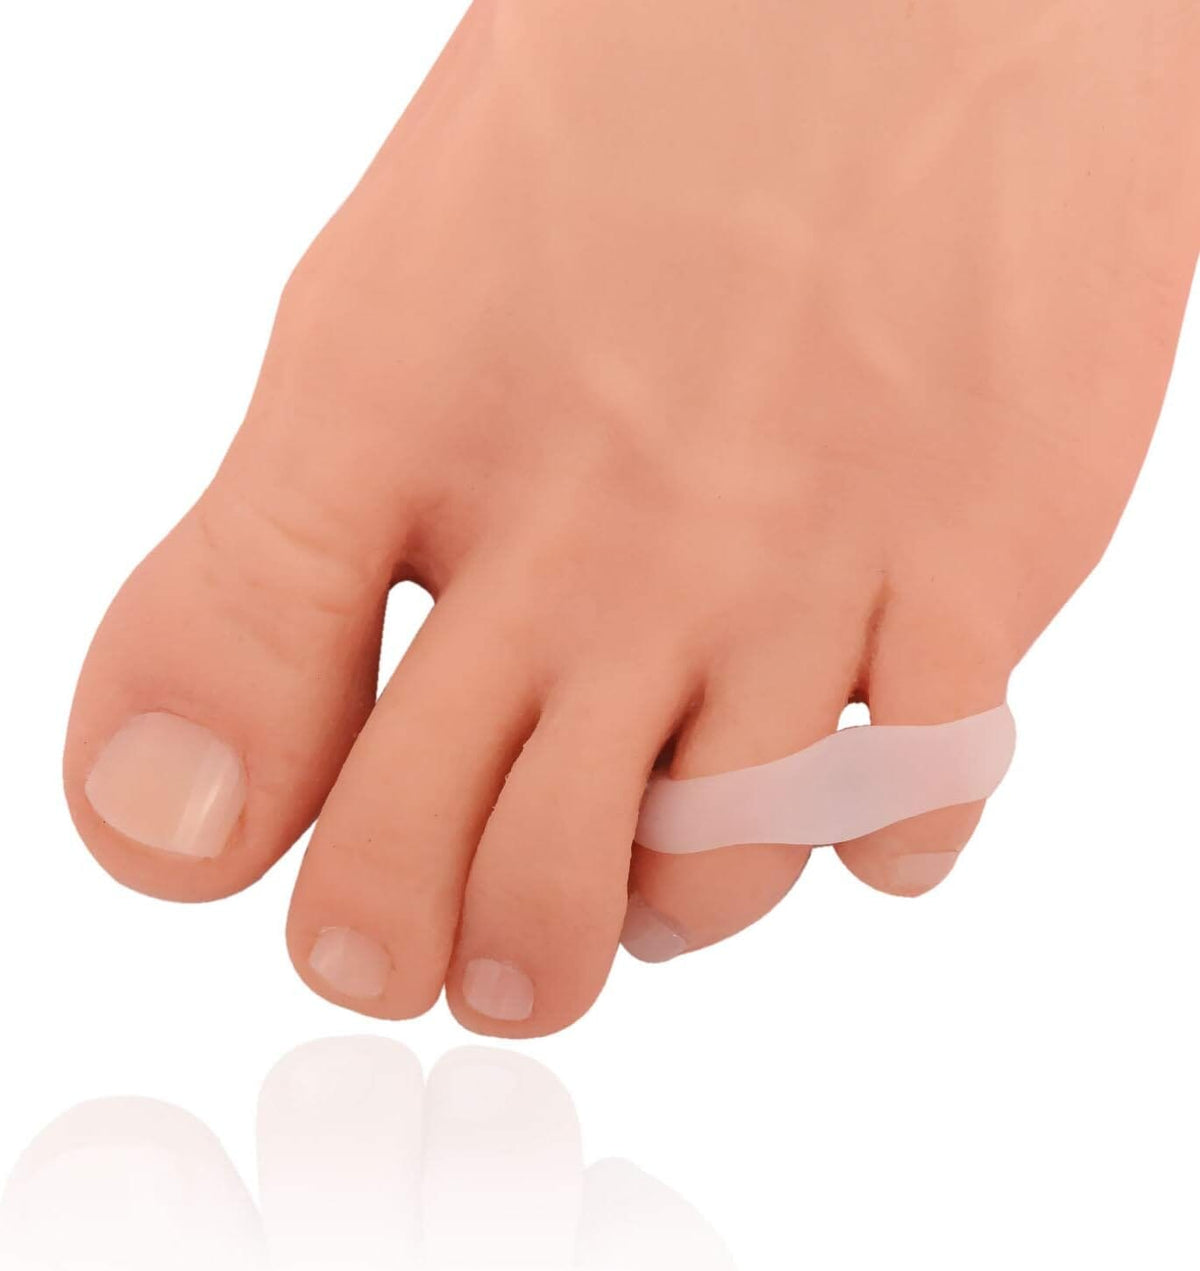 Dr. Frederick&#39;s Original Tailor&#39;s Bunion Sport Spacers - 6pcs - Soft Gel Tailor&#39;s Bunion Corrector - Pinky Toe Protection - Fast Bunionette Pain Relief for Men &amp; Women - Prevent Toe Rubbing Foot Pain Dr. Frederick&#39;s Original 